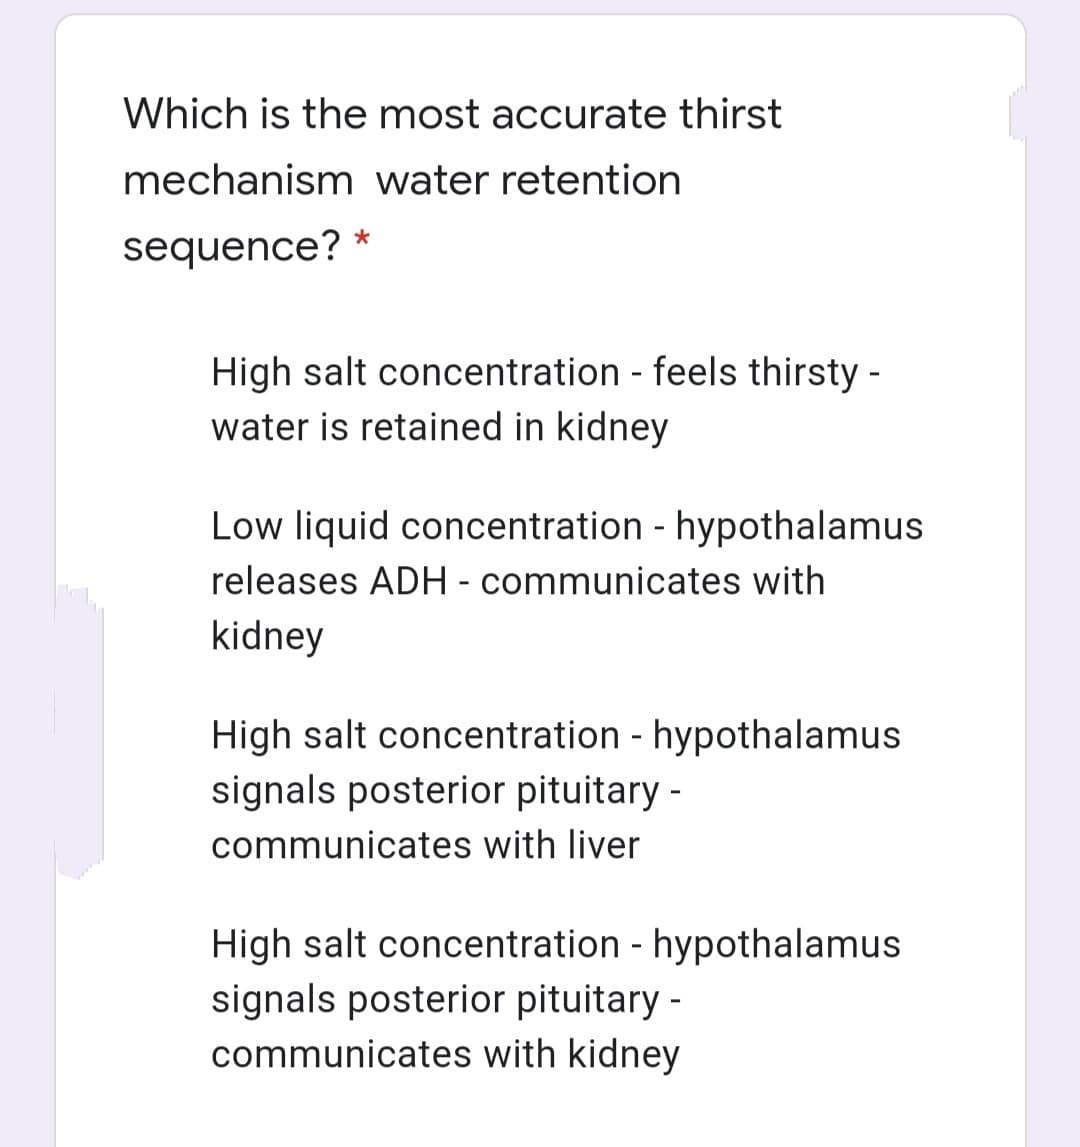 Which is the most accurate thirst
mechanism water retention
sequence?
High salt concentration - feels thirsty -
water is retained in kidney
Low liquid concentration - hypothalamus
releases ADH - communicates with
kidney
High salt concentration - hypothalamus
signals posterior pituitary -
communicates with liver
High salt concentration - hypothalamus
signals posterior pituitary -
communicates with kidney
